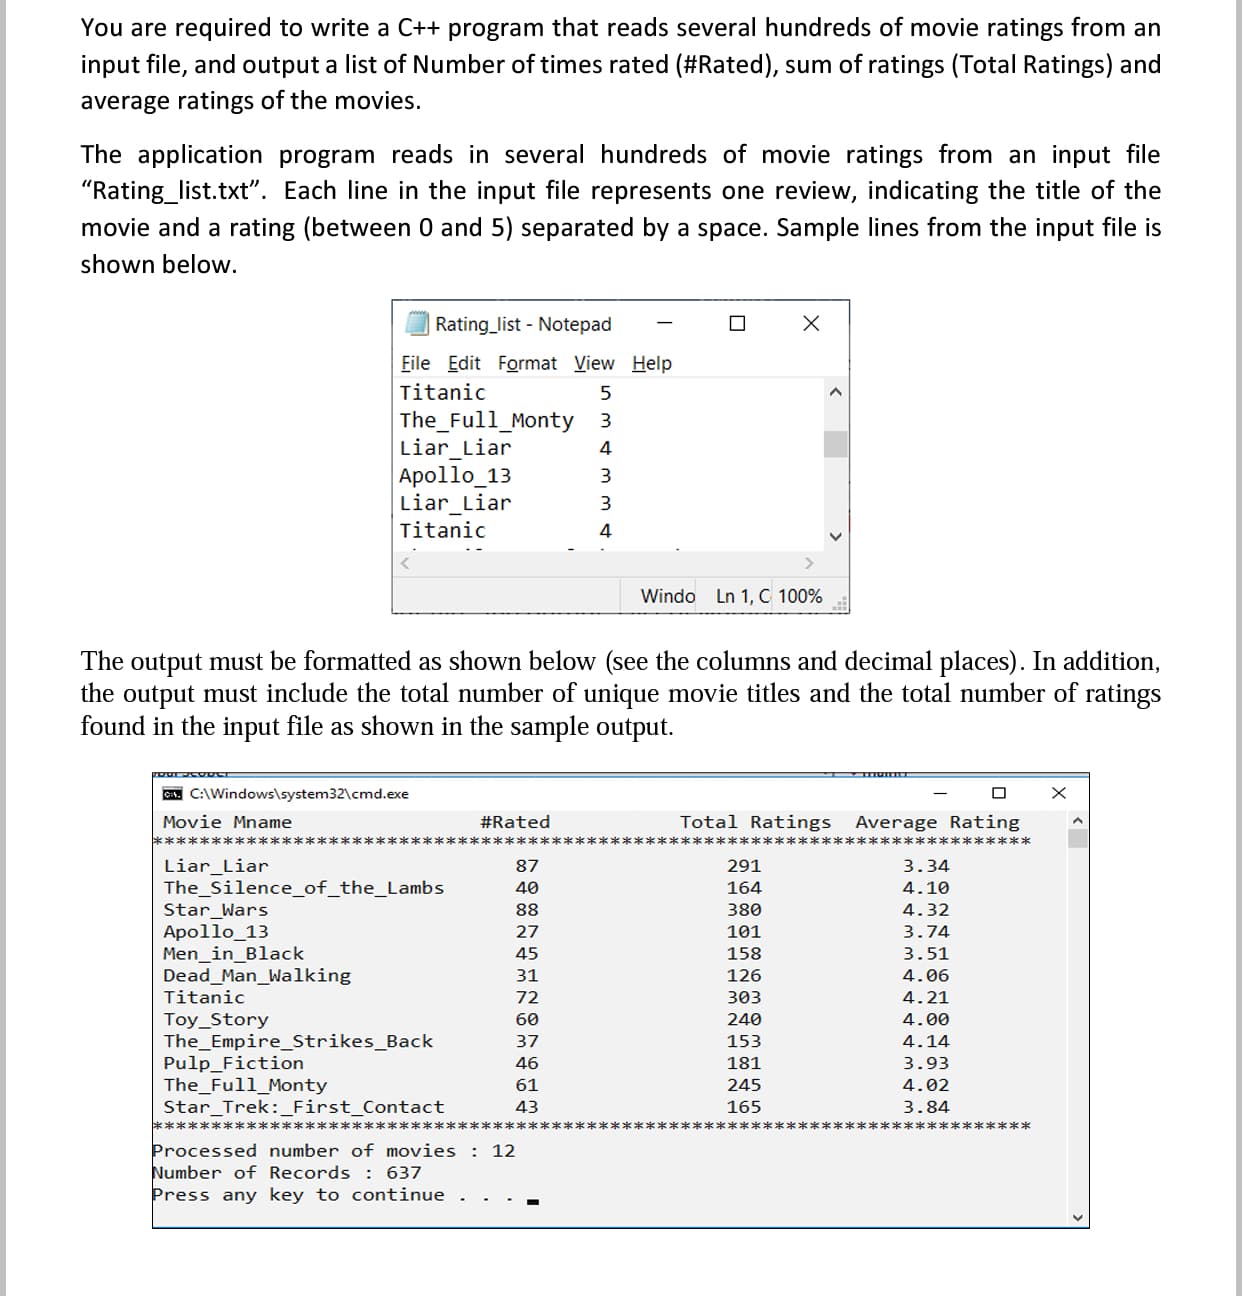 You are required to write a C++ program that reads several hundreds of movie ratings from an
input file, and output a list of Number of times rated (#Rated), sum of ratings (Total Ratings) and
average ratings of the movies.
The application program reads in several hundreds of movie ratings from an input file
"Rating_list.txt". Each line in the input file represents one review, indicating the title of the
movie and a rating (between 0 and 5) separated by a space. Sample lines from the input file is
shown below.
Rating_list - Notepad
File Edit Format View Help
Titanic
The_Full_Monty 3
Liar_Liar
Apollo_13
Liar_Liar
Titanic
4
3
4
Windo Ln 1, C 100%
The output must be formatted as shown below (see the columns and decimal places). In addition,
the output must include the total number of unique movie titles and the total number of ratings
found in the input file as shown in the sample output.
A. C:\Windows\system32\cmd.exe
Movie Mname
#Rated
Total Ratings Average Rating
*************
***********
*************
Liar_Liar
The_Silence_of_the_Lambs
Star_Wars
Apollo_13
Men_in_Black
Dead_Man_Walking
Titanic
87
291
3.34
40
164
4.10
380
101
88
4.32
27
3.74
45
158
3.51
31
126
4.06
72
303
4.21
Toy_Story
The_Empire_strikes_Back
Pulp_Fiction
The_Full_Monty
Star_Trek:_First_Contact
********************
60
240
4.00
37
153
4.14
46
181
3.93
61
245
4.02
43
165
3.84
*********
Processed number of movies : 12
Number of Records : 637
Press any key to continue
